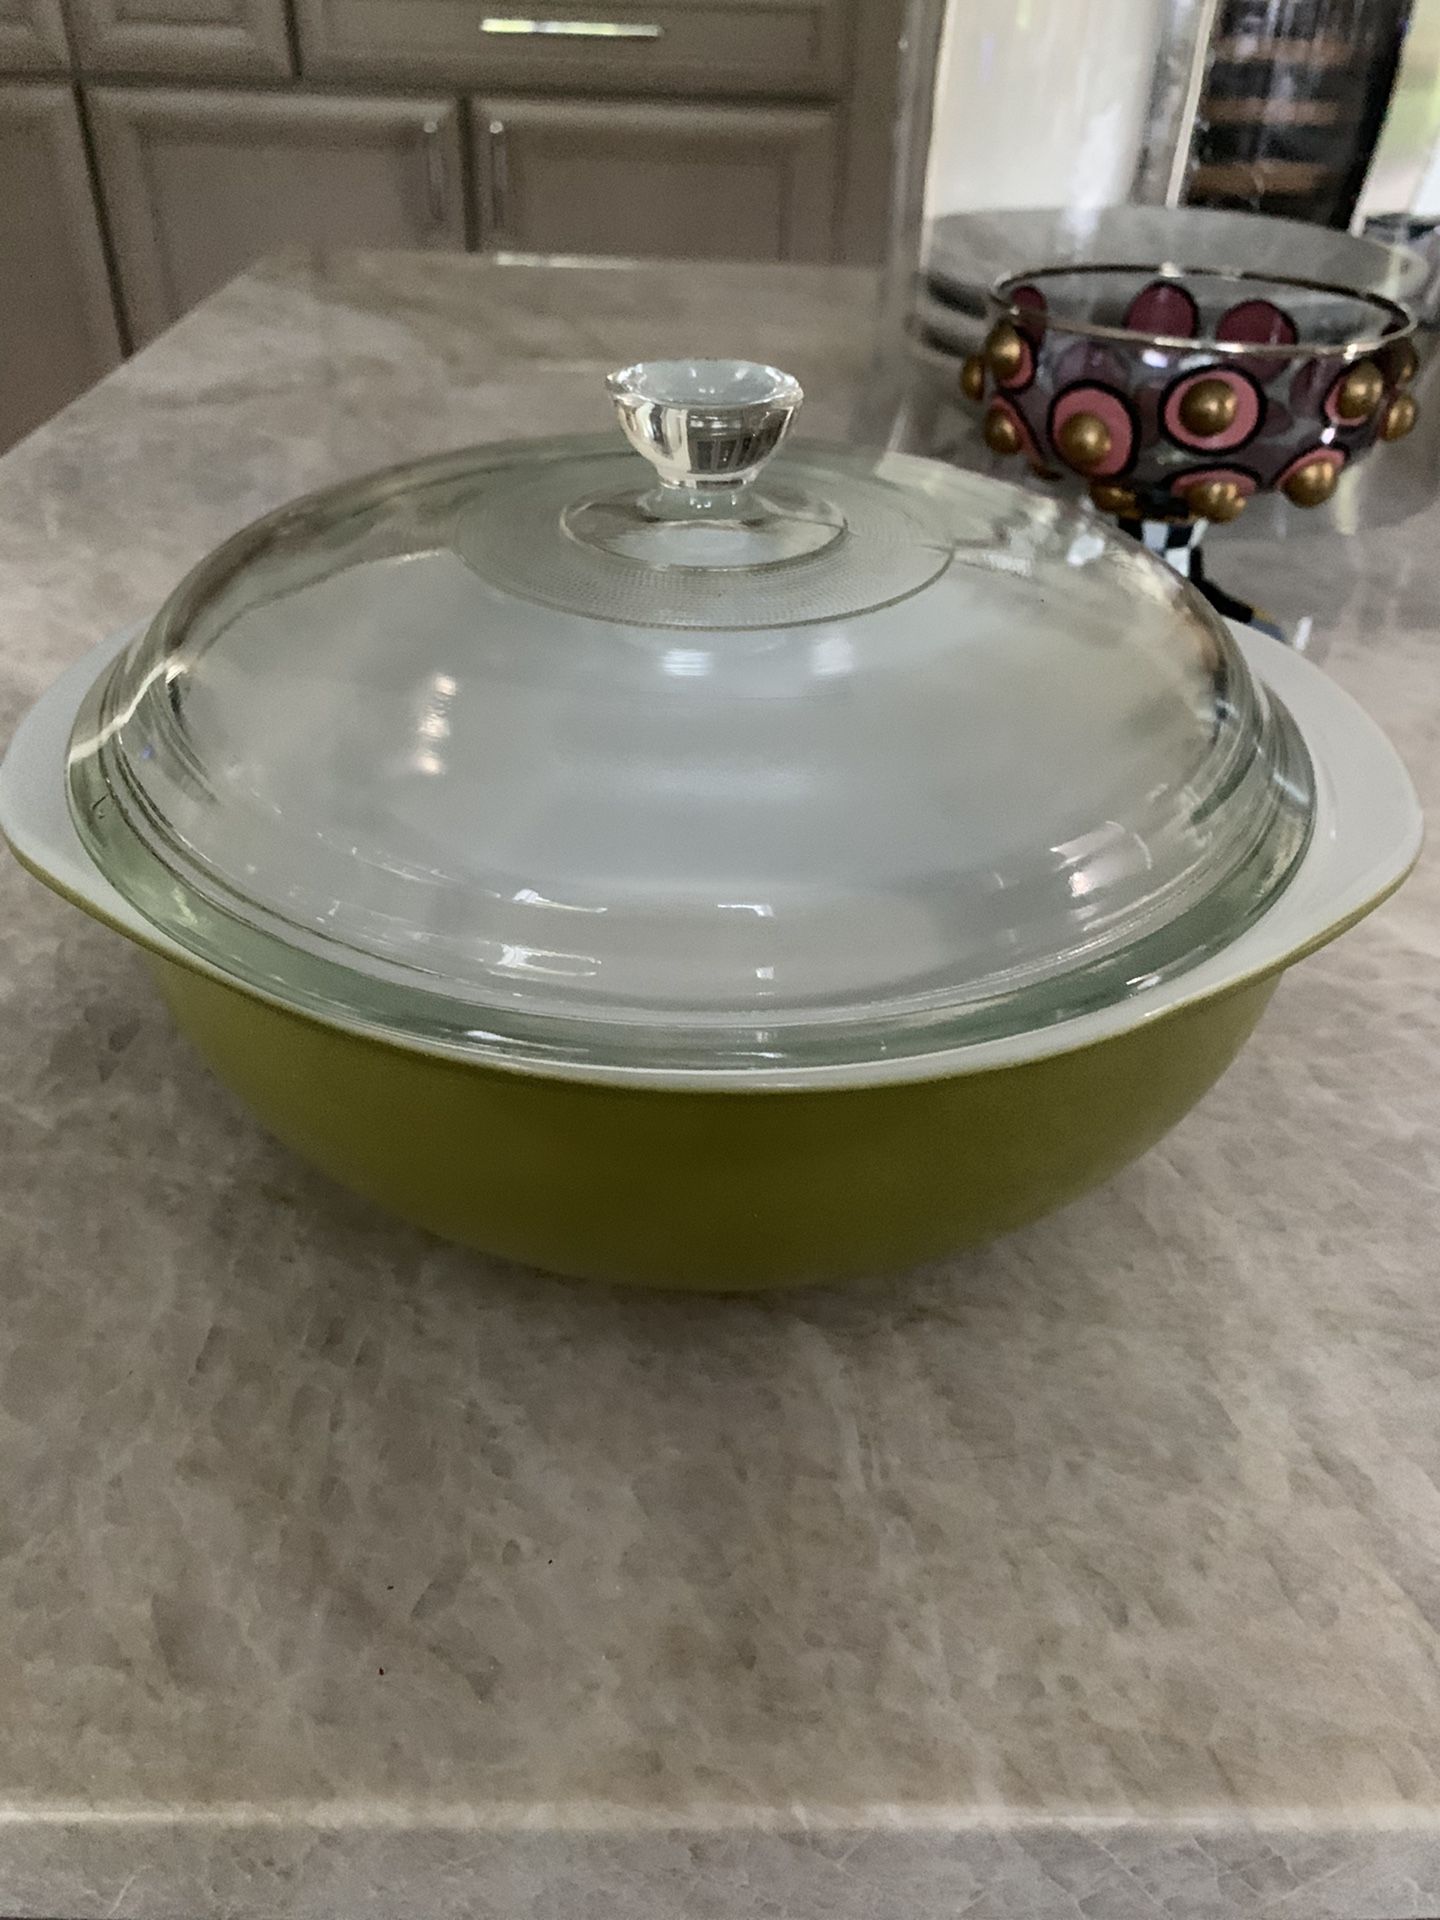 Vintage Pyrex glass bowl and glass lid